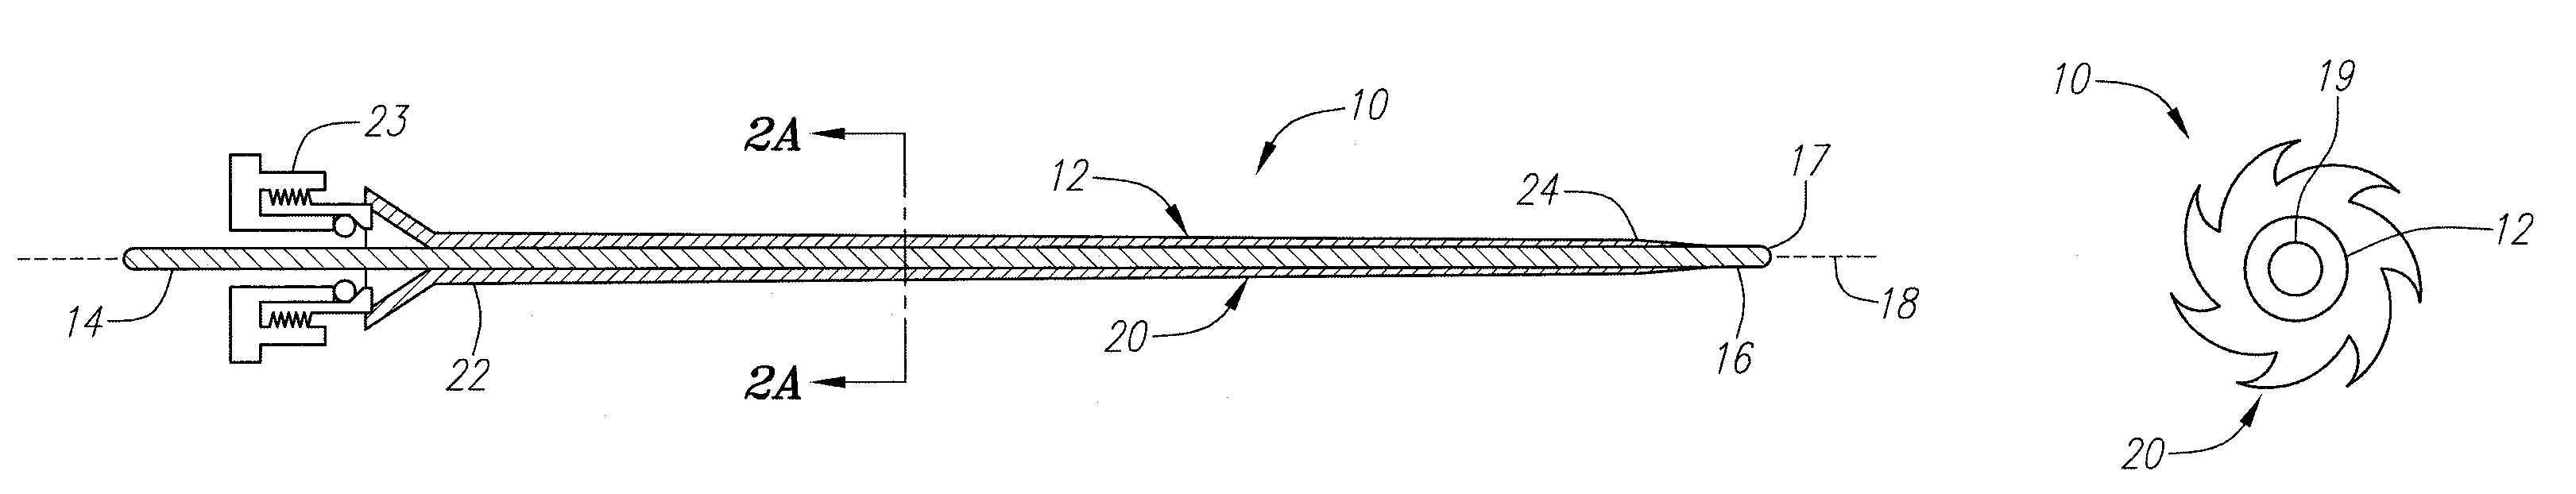 Expandable guide sheath and apparatus and methods using such sheaths